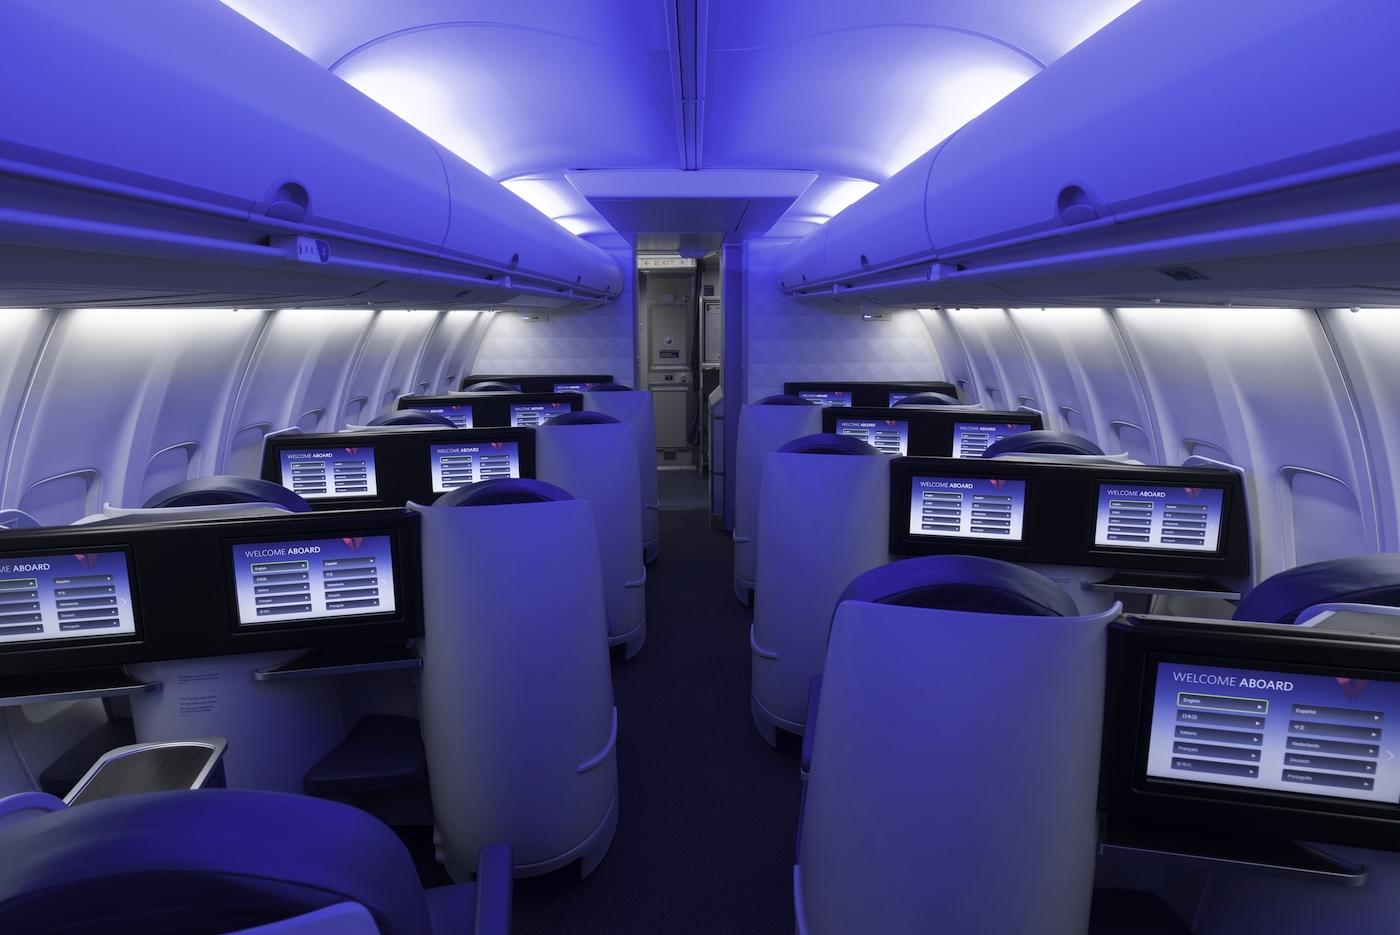 The Middle Of Market Airplane Aircraft Interiors